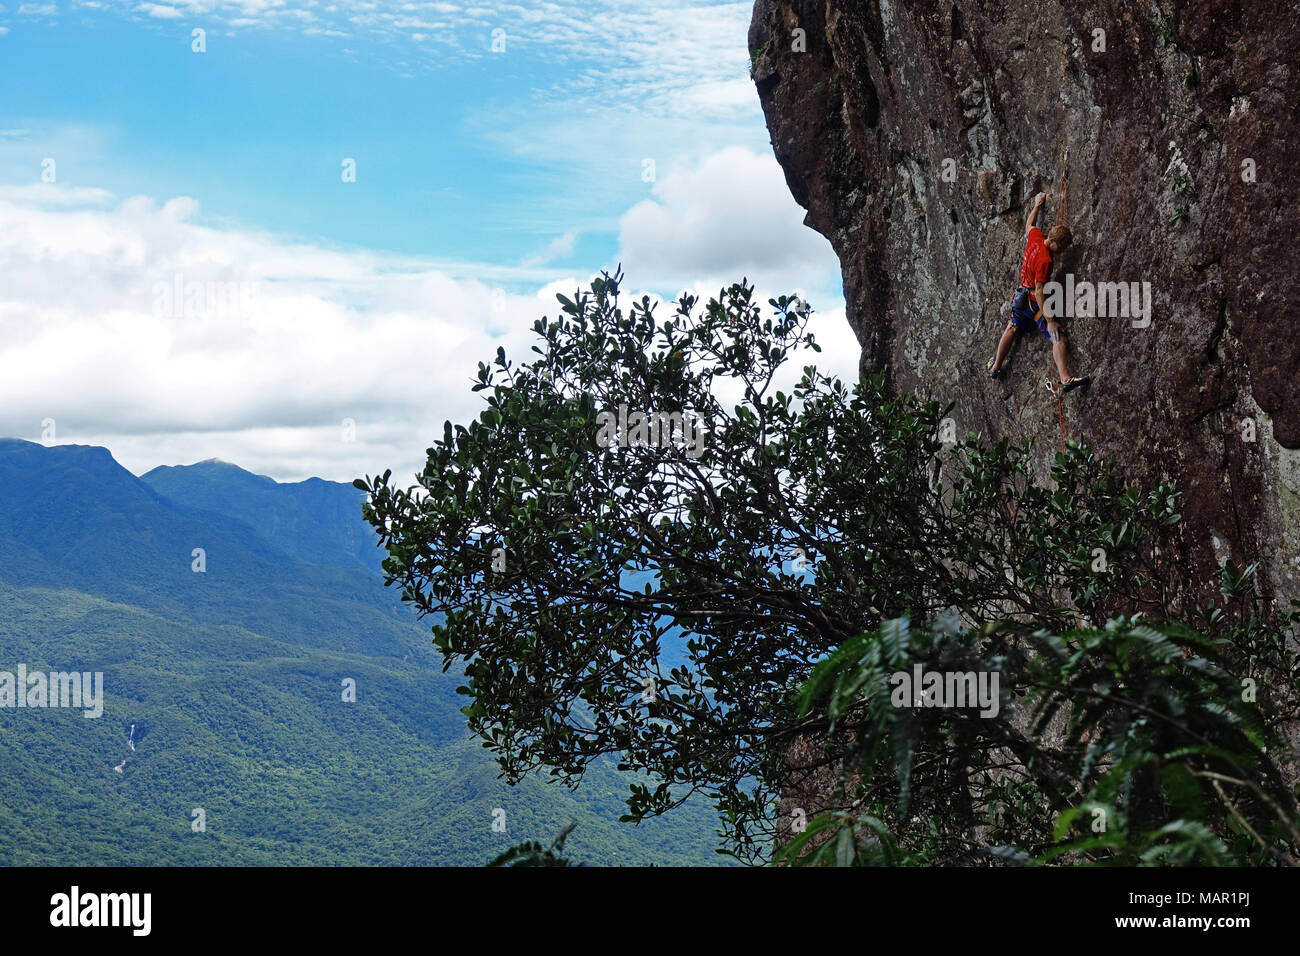 A rock climber scales the famous granite cliffs of Marumbi, a mountain in Parana State, south Brazil, South America Stock Photo